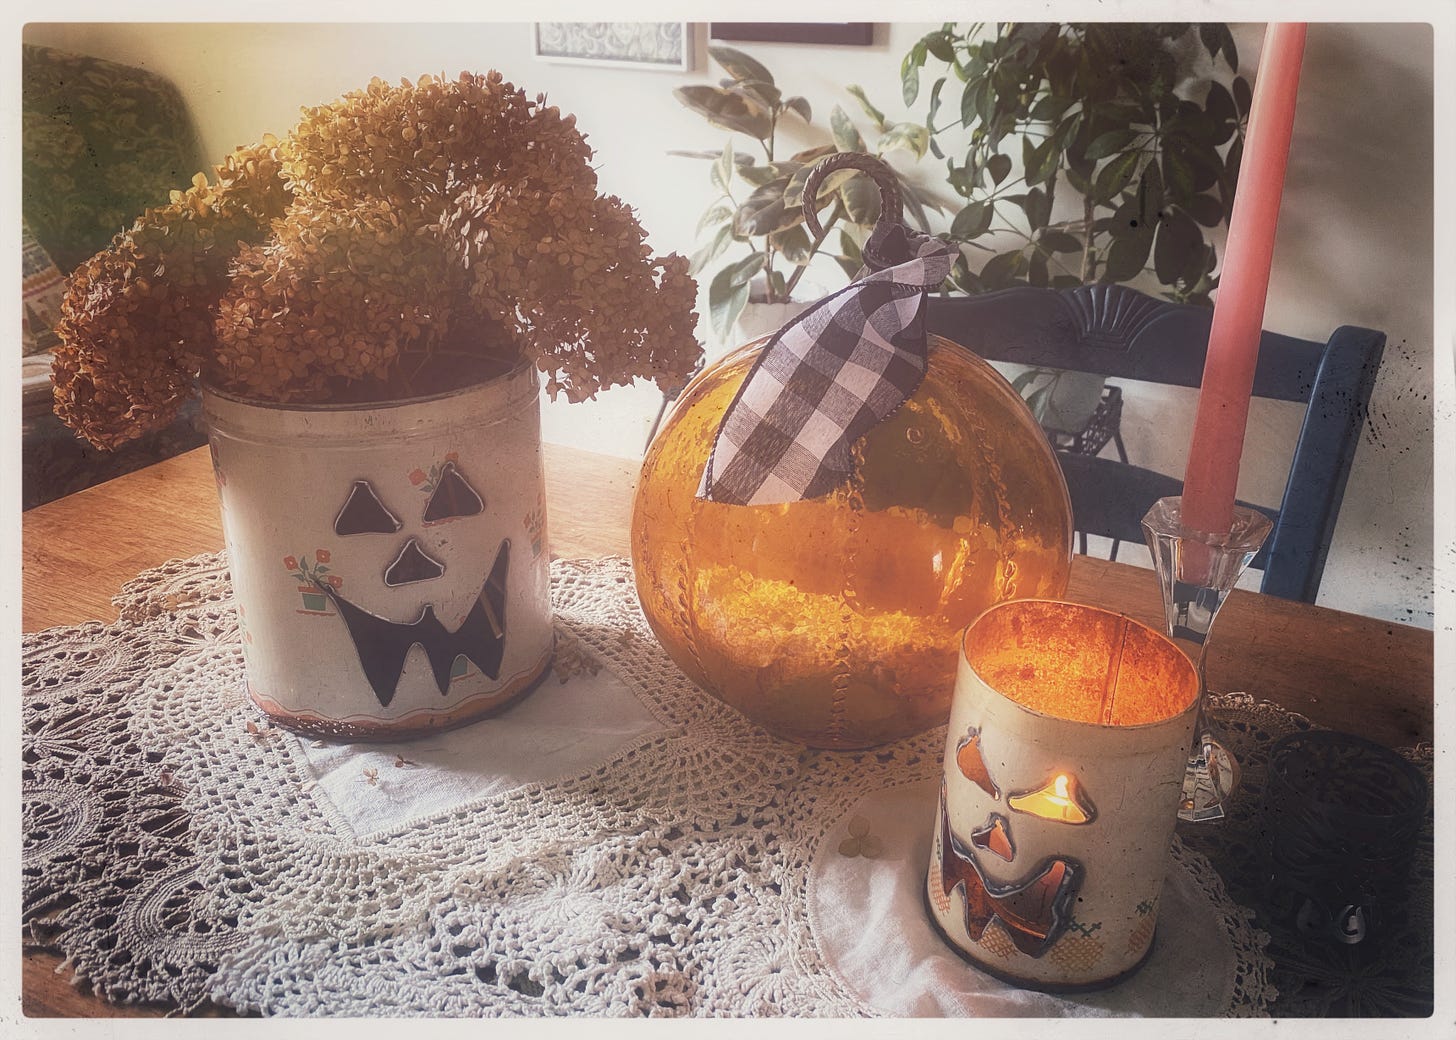 photo of a festive decorate table, including a glass pumpkin, jack o lantern canisters, and vintage doilies.